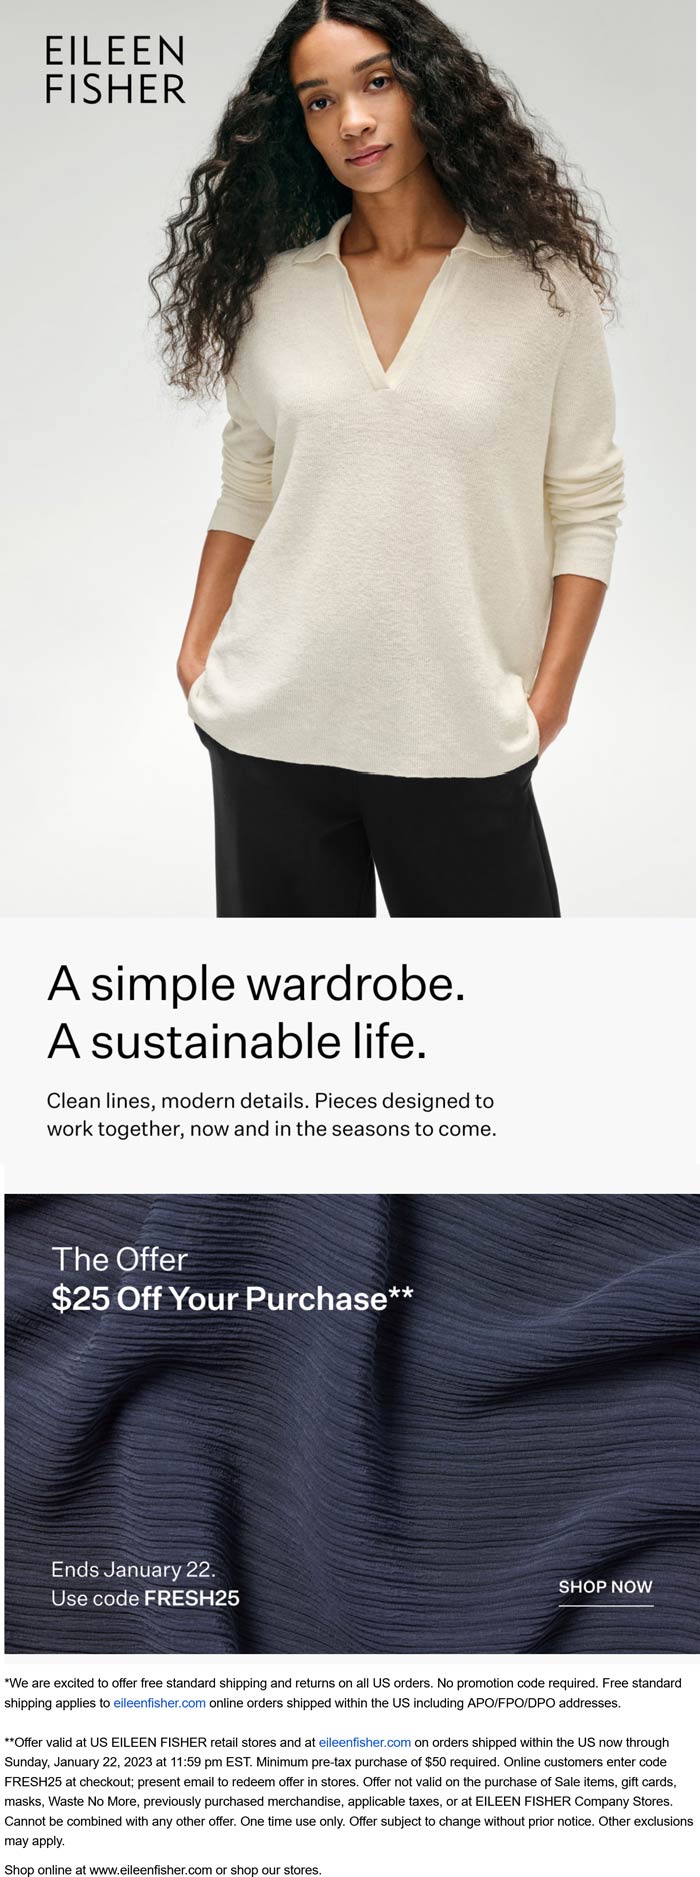 Eileen Fisher stores Coupon  $25 off at Eileen Fisher via promo code FRESH25 #eileenfisher 